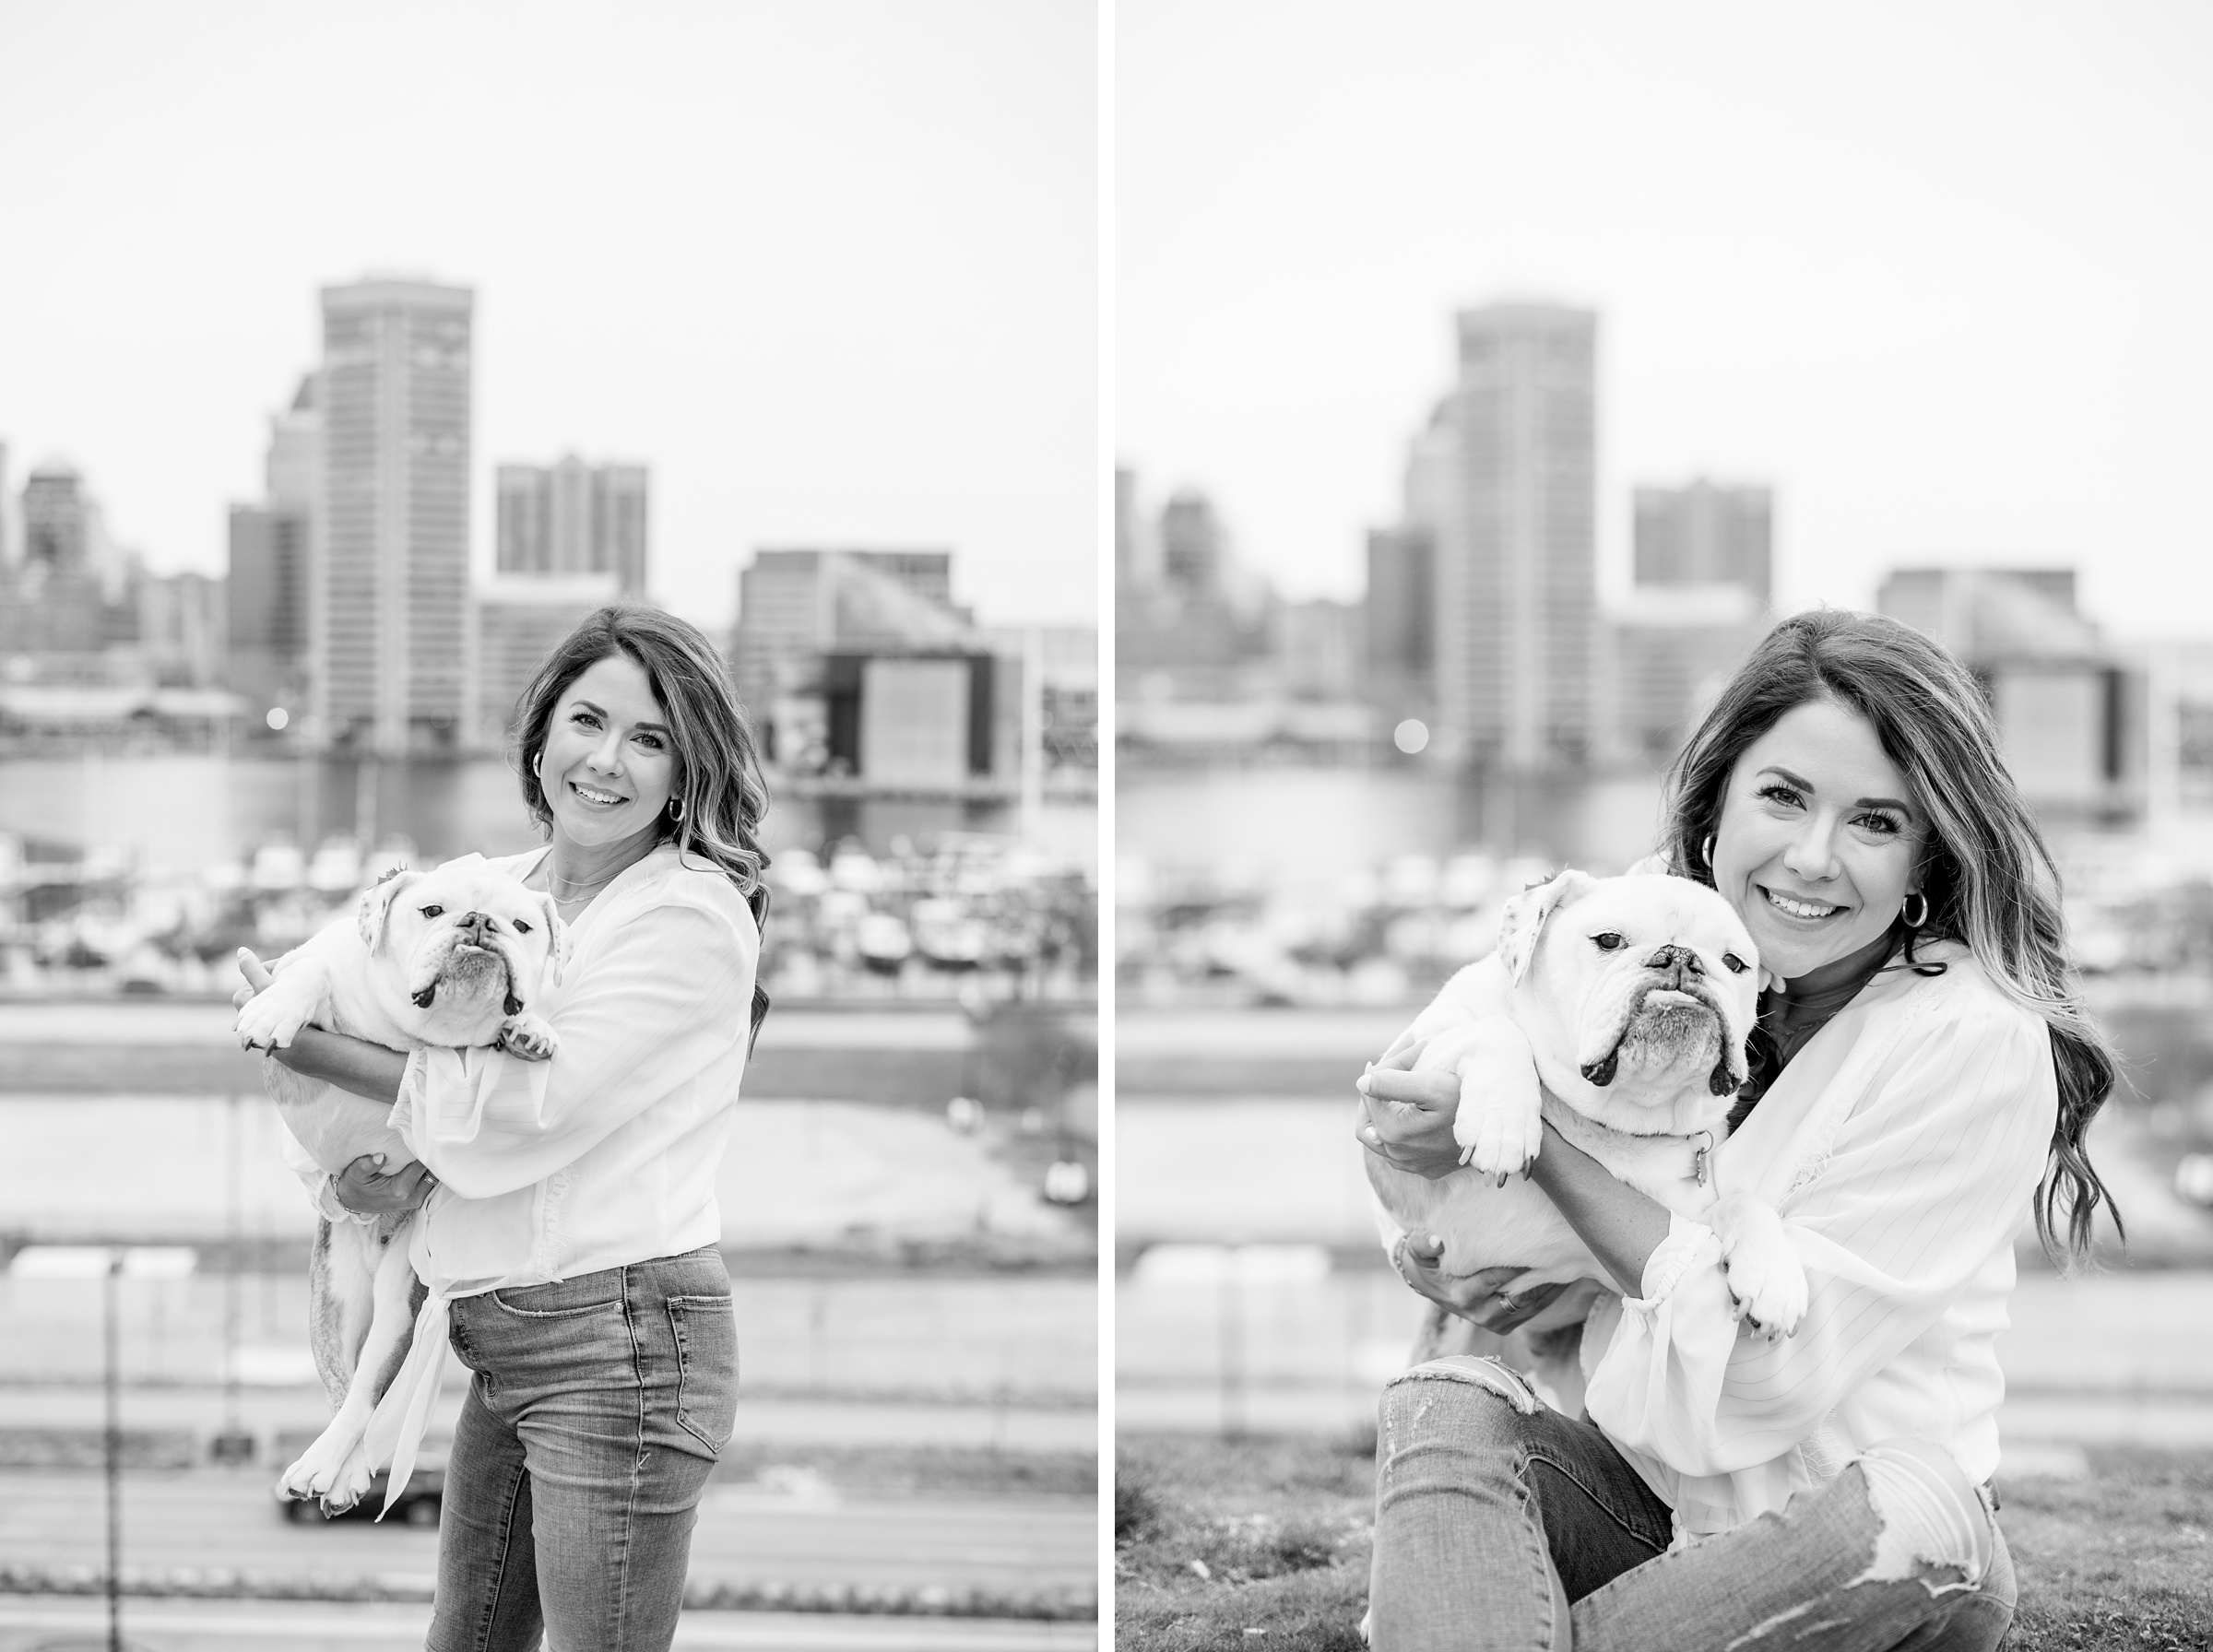 Baltimore Pet Portrait mini session with Lindsey and her English Bulldog, Molly at Federal Hill Park in Baltimore, MD